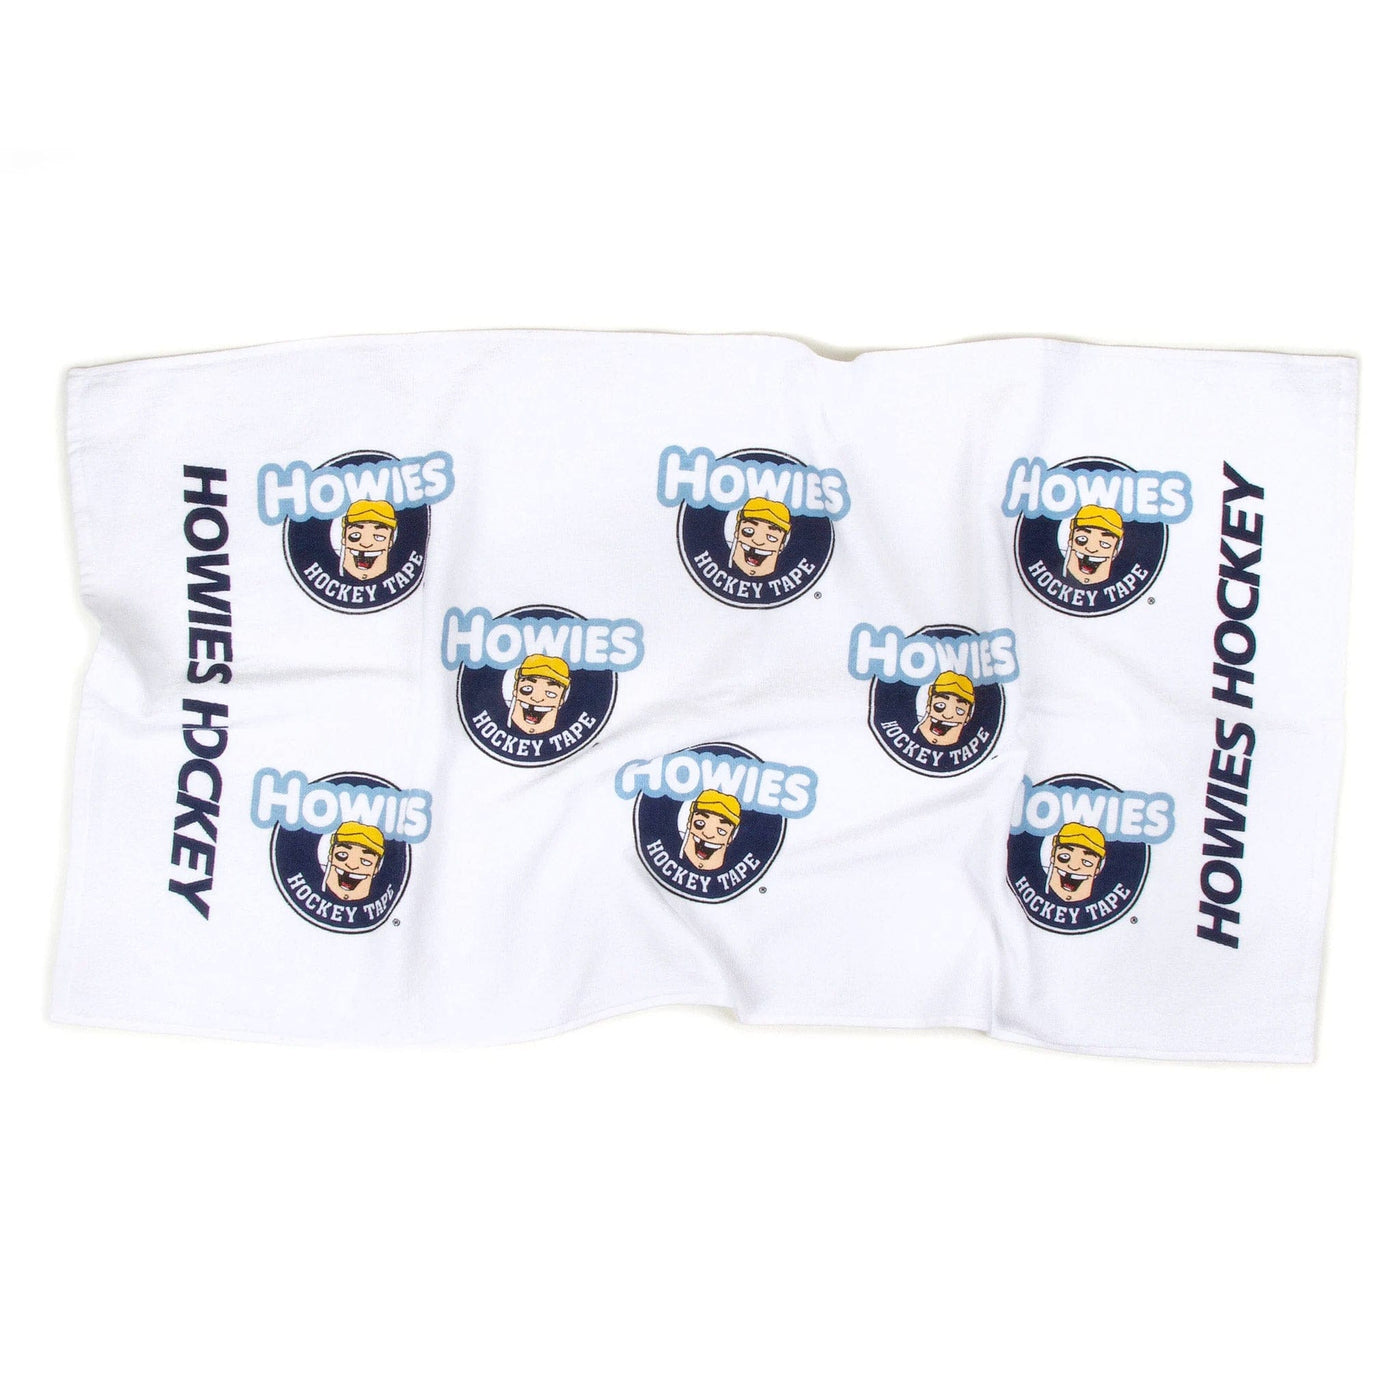 Howie's Bench Towel - The Hockey Shop Source For Sports